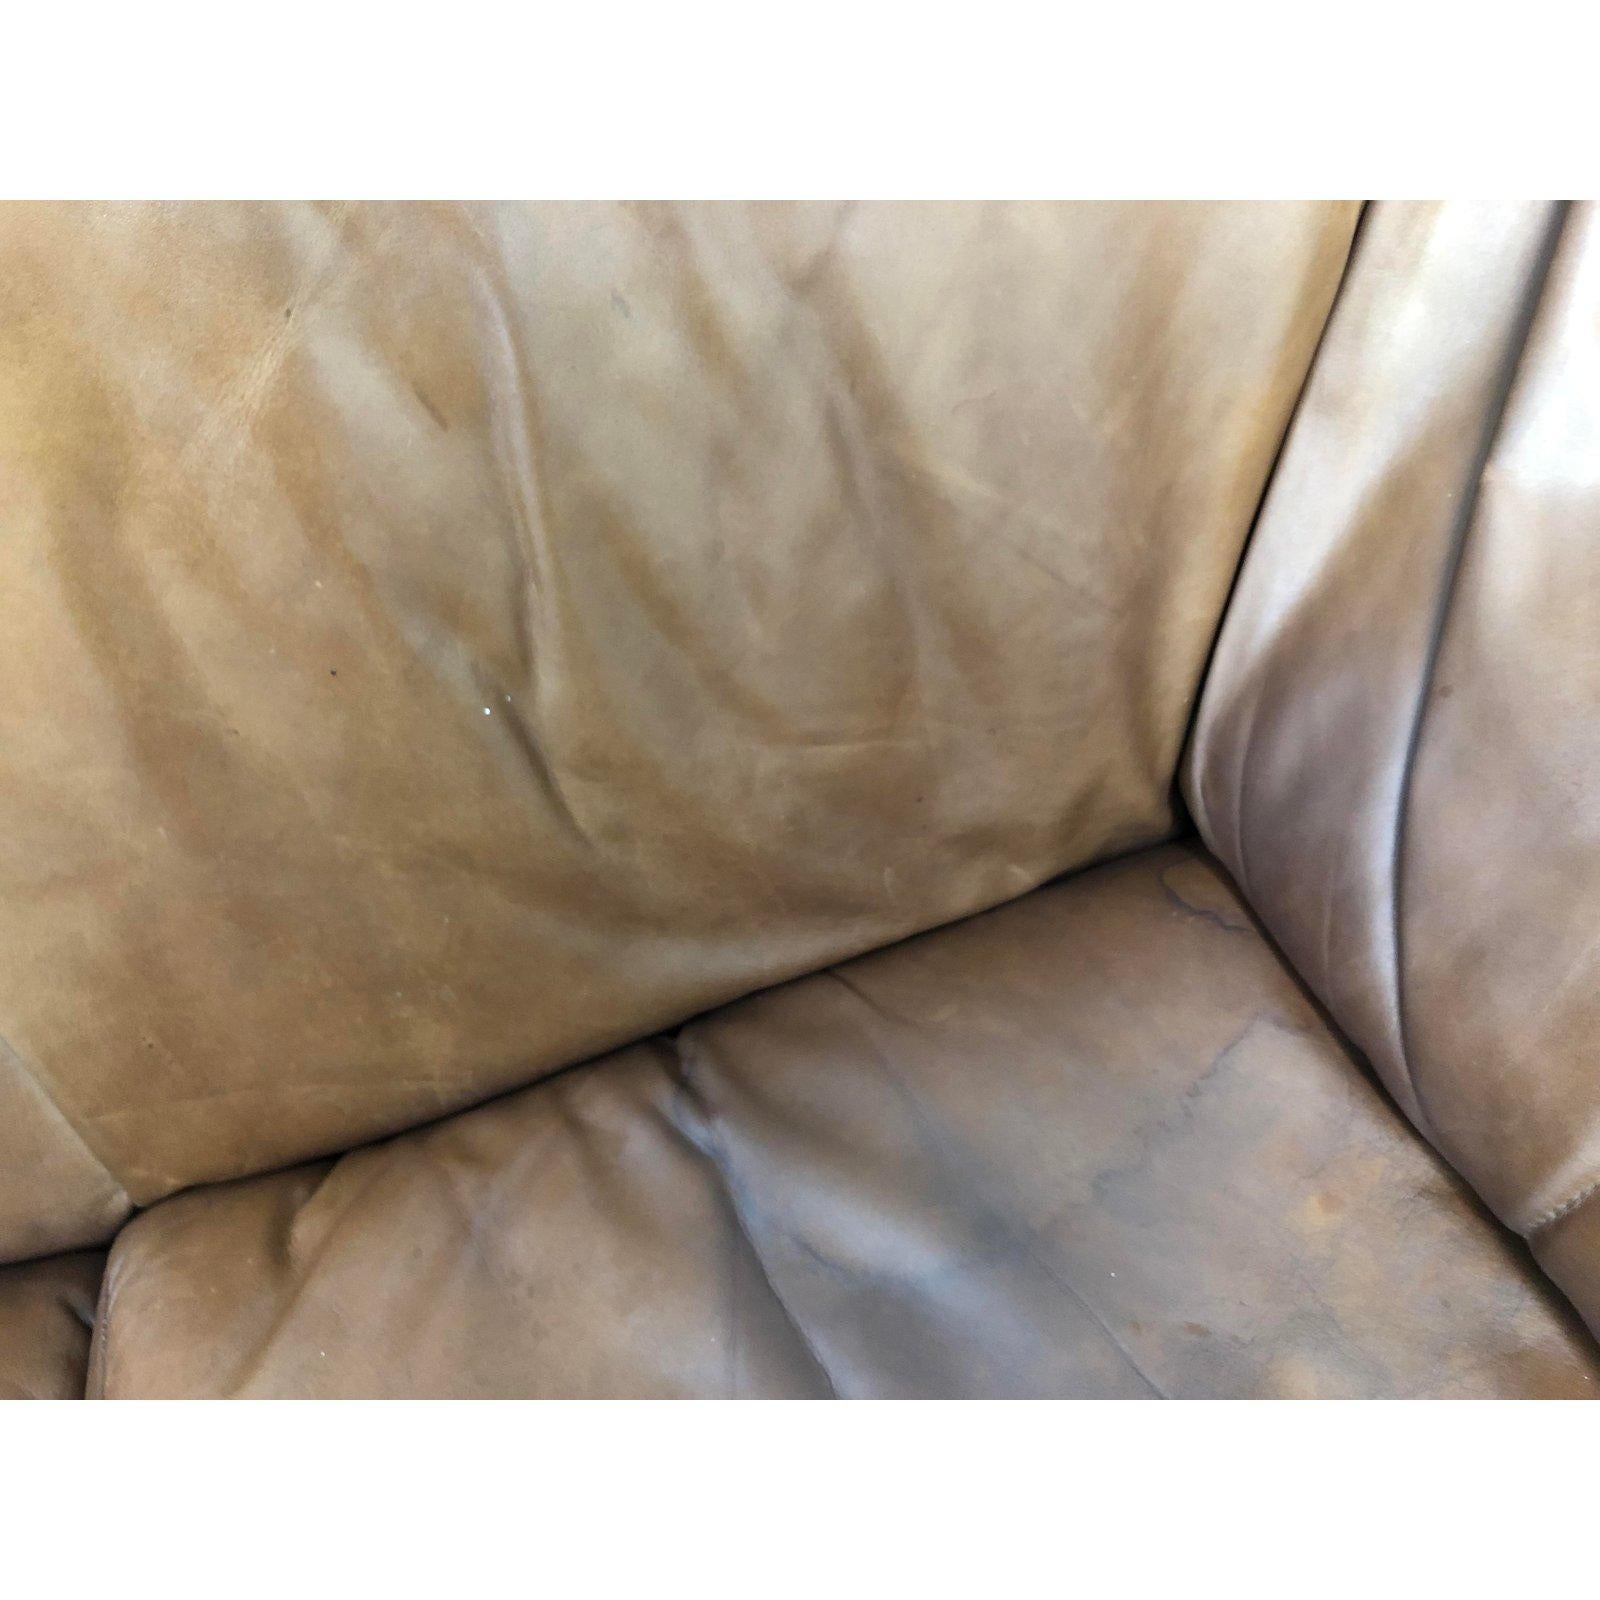 A Le Stelle B&B Italia 1980s leather sofa. Designed by Mario Bellini. Bring comfort, luxury and style into your sitting room. The arms are flared with a slanted back for lounging. Distress leather is in good condition with minor imperfections. One